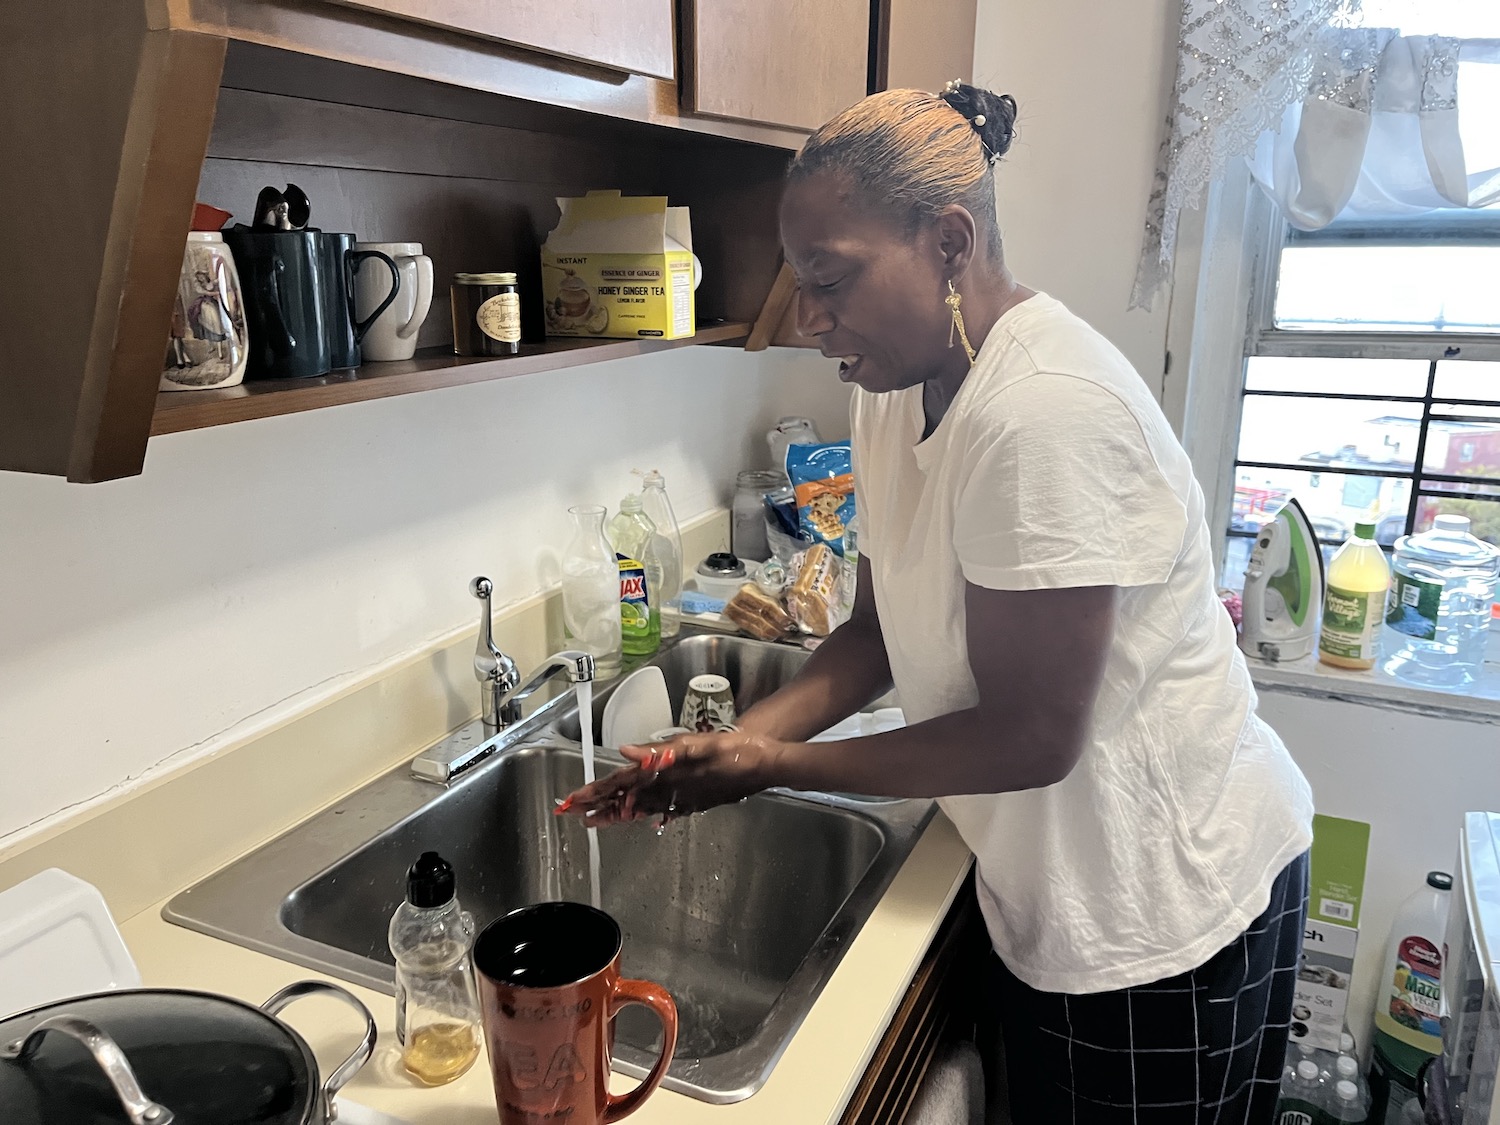 For years, Bridget Tuck has only used her tap water for washing her hands, bathing, and occasionally to help her swallow medication. Here she is, washing her hands in her kitchen sink.